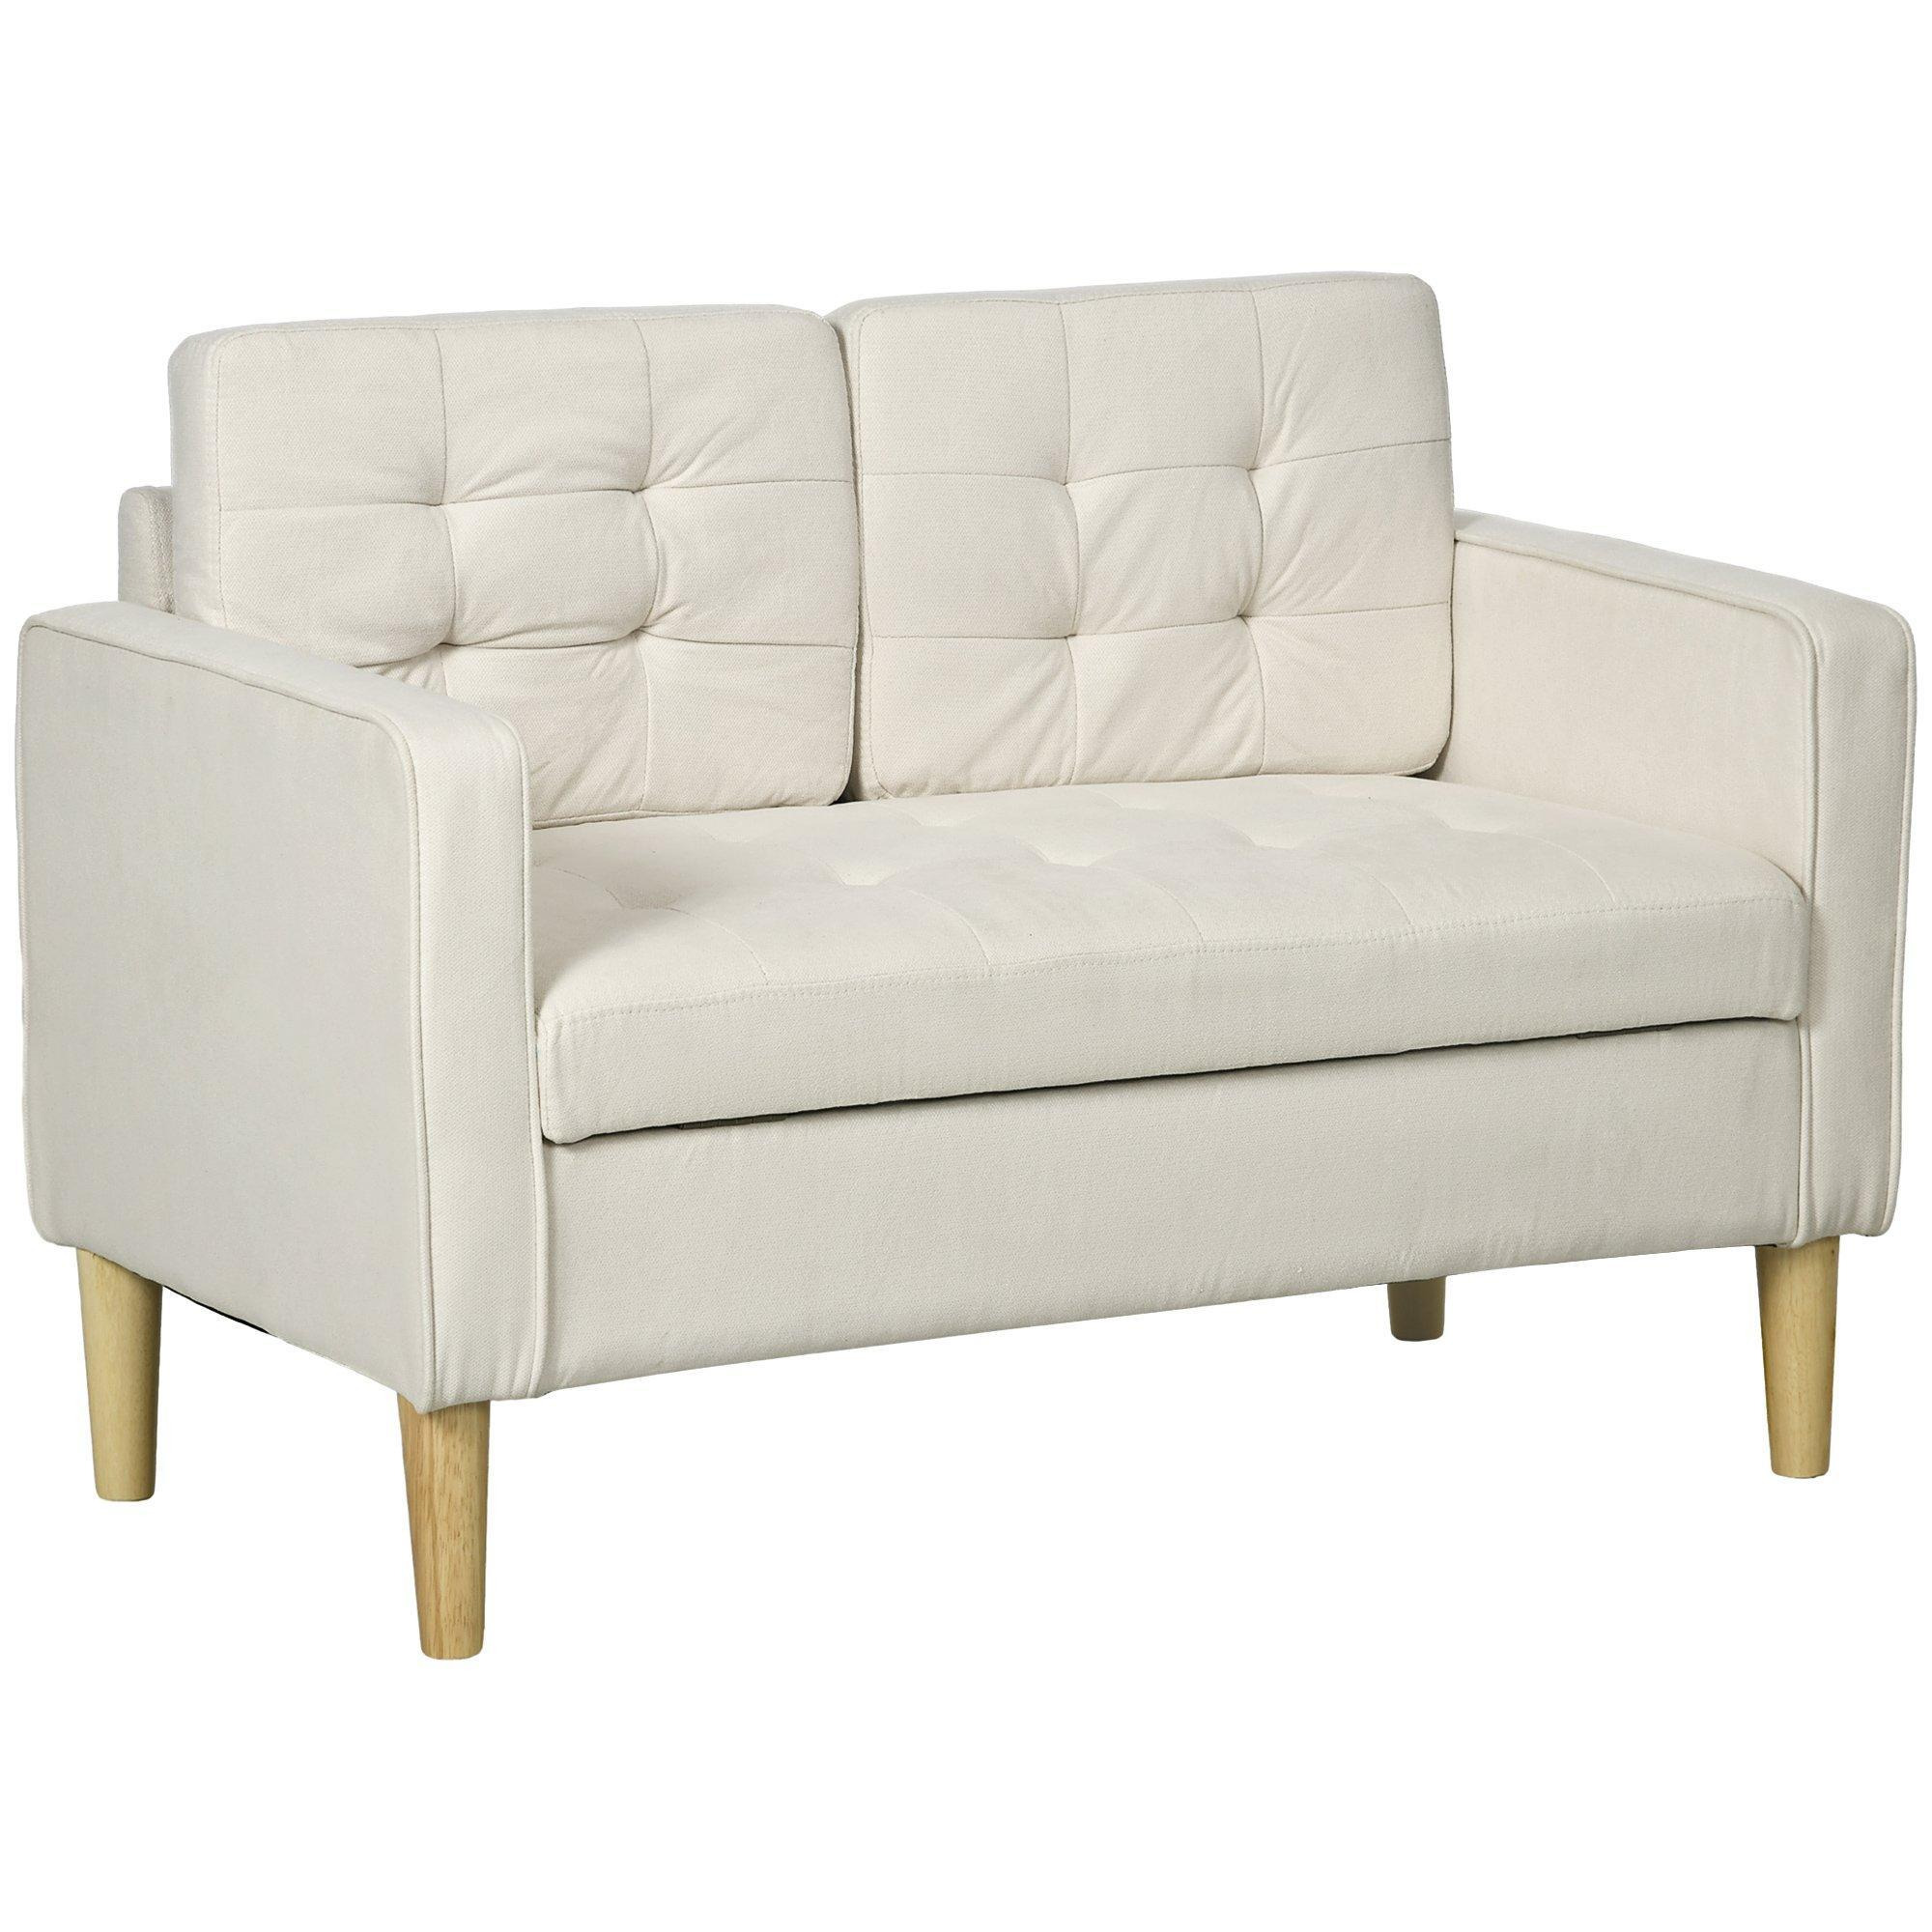 Modern 2 Seater Sofa with Storage Compact Loveseat Sofa Living Room - image 1